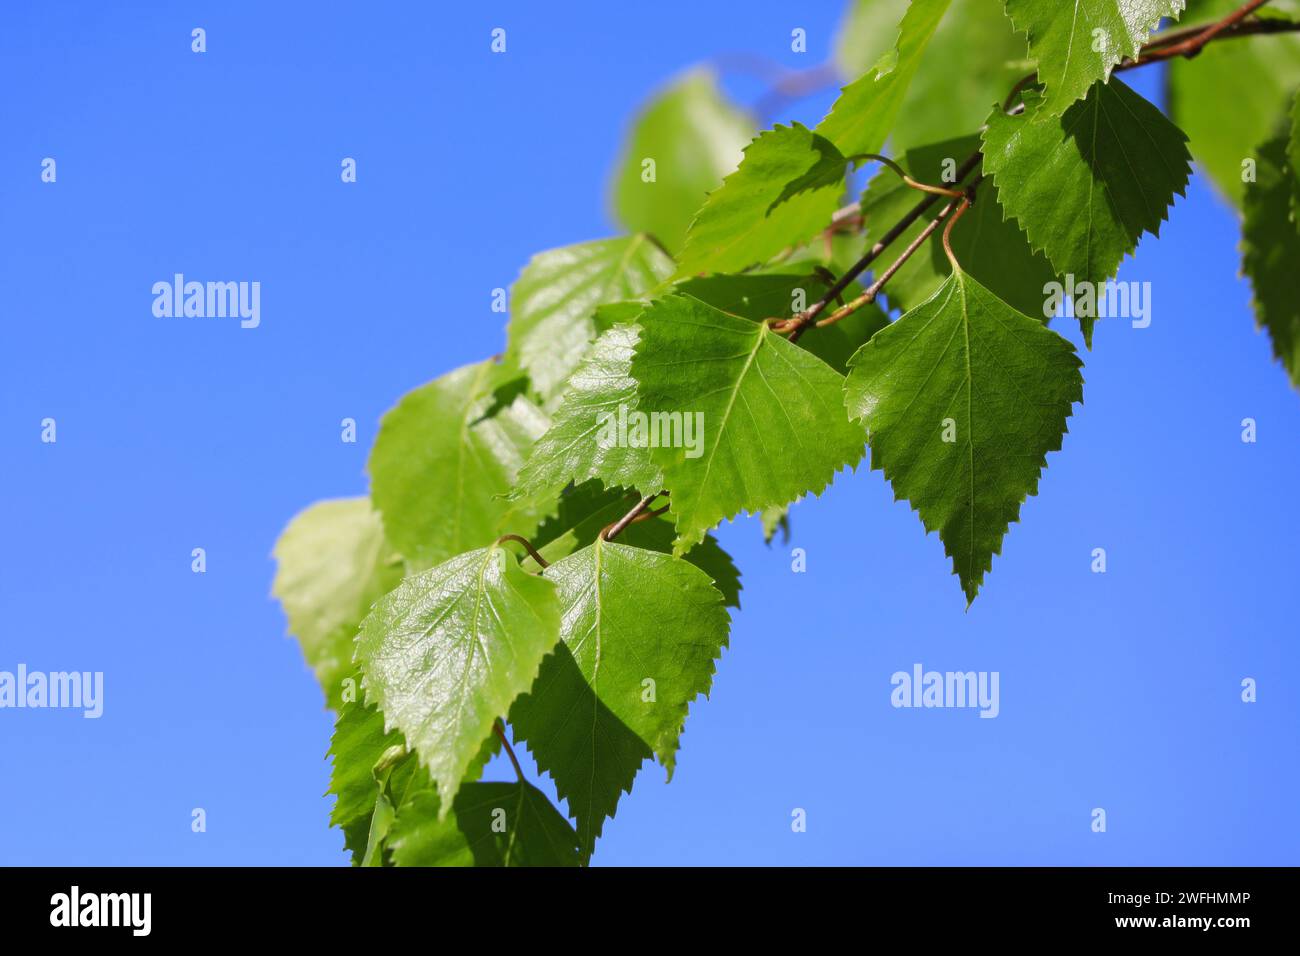 Betula pendula, Silver birch, leaves against blue sky in the spring. B. pendula bark extracts inhibit growth of in vitro malignant human cell lines. Stock Photo